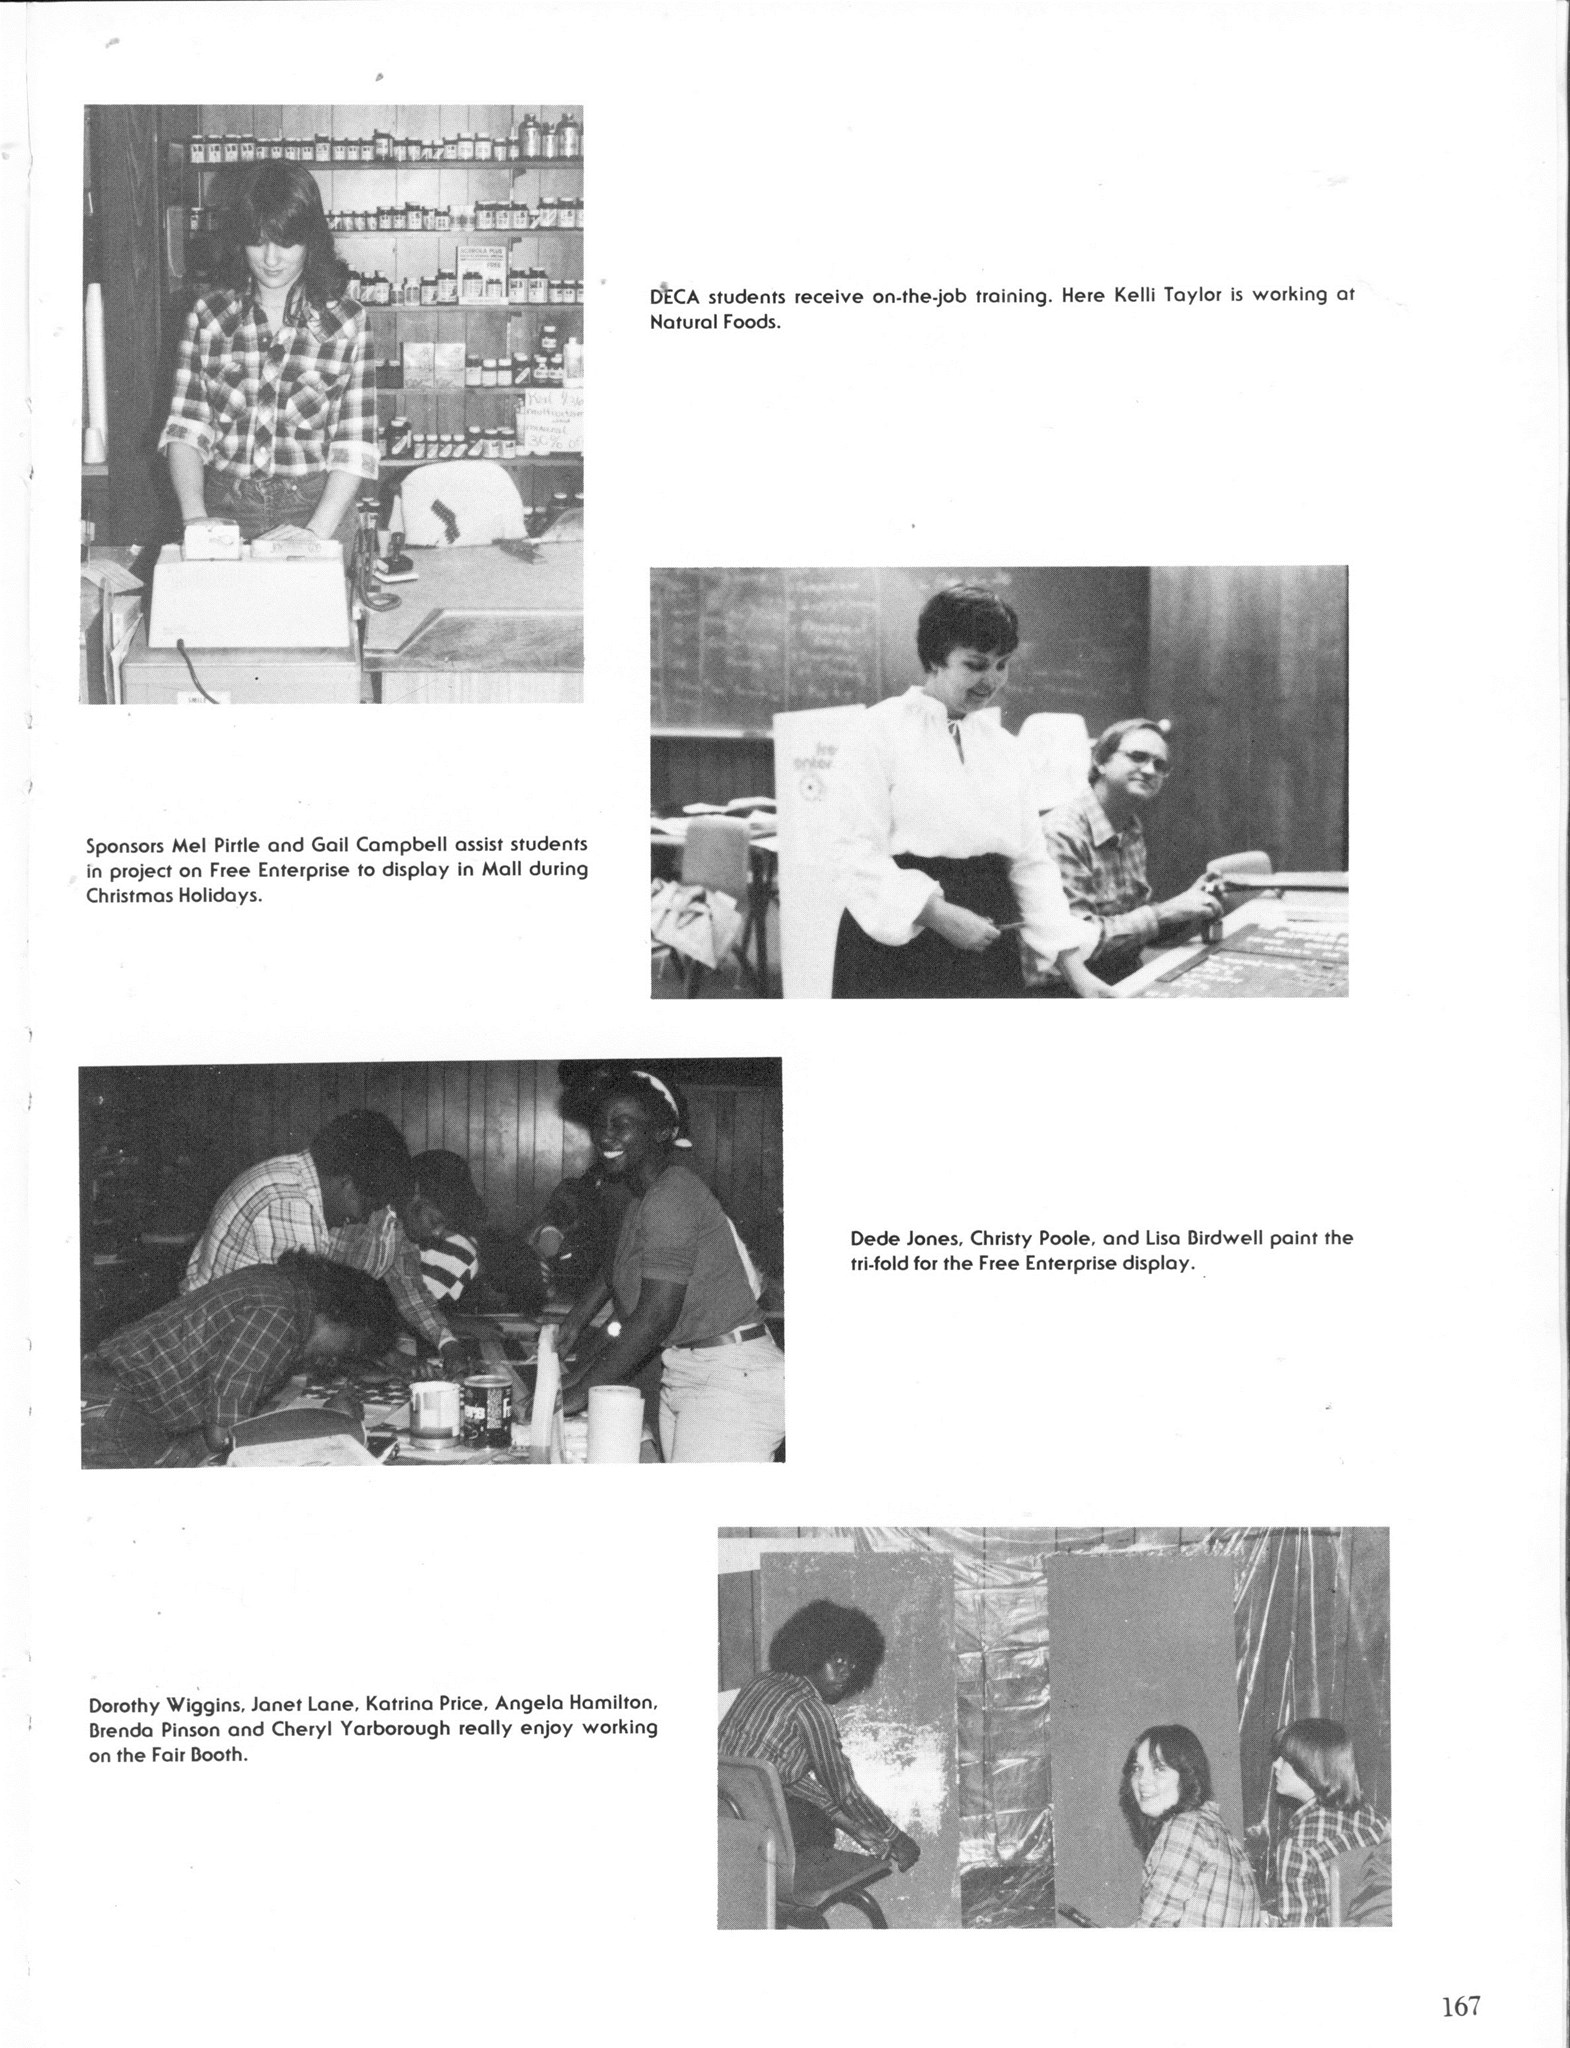 ../../../Images/Large/1982/Arclight-1982-pg0167.jpg